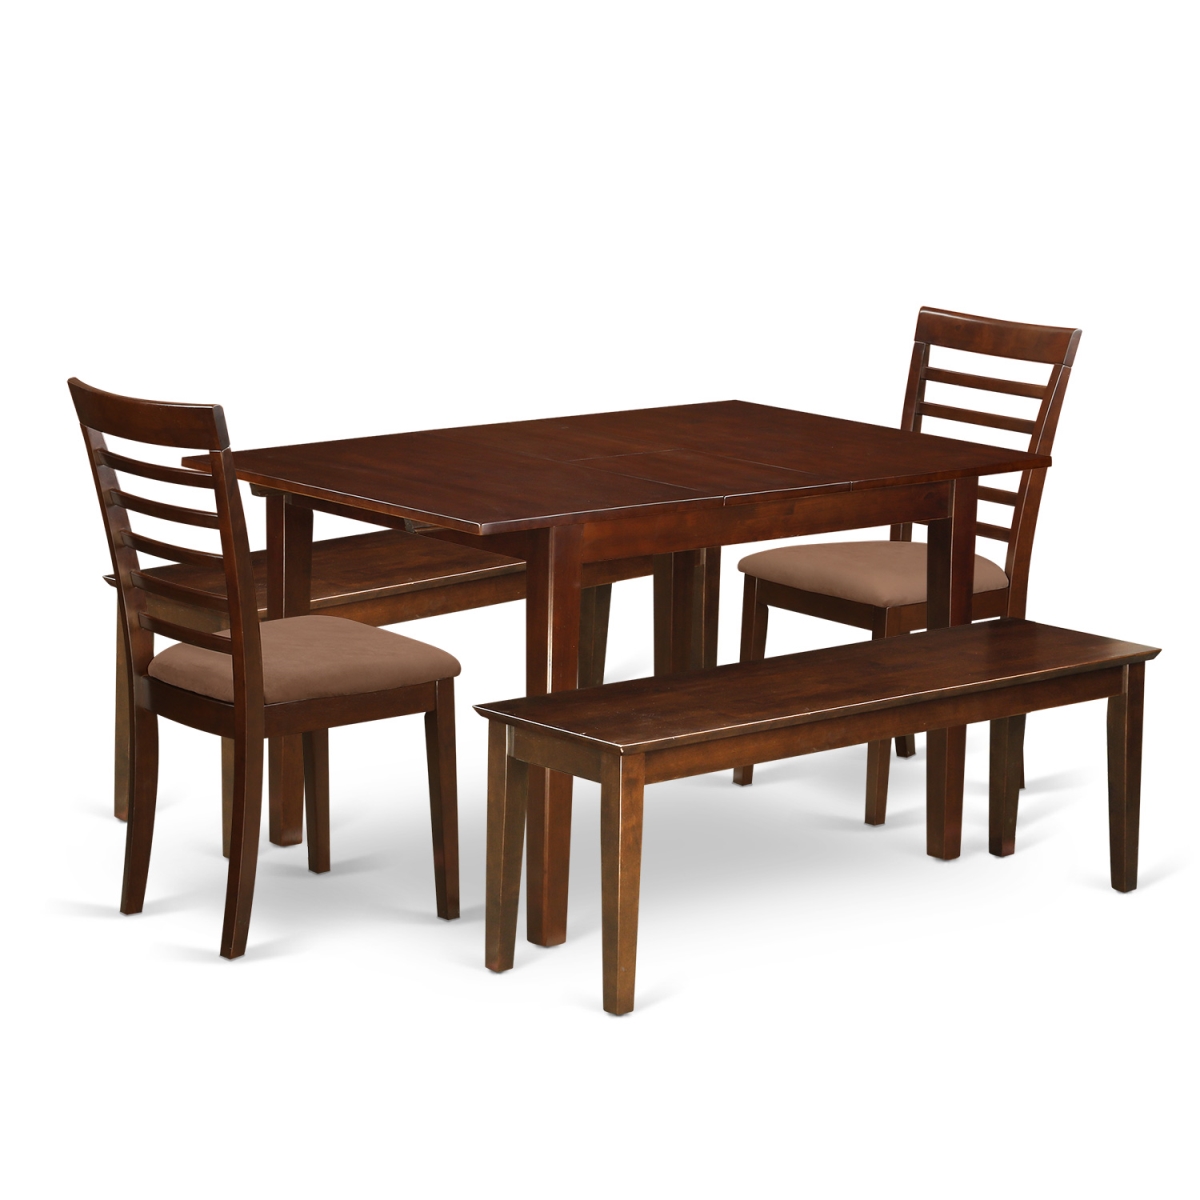 Picture of East West Furniture MILA5C-MAH-C Dinette Set - Small Dining Tables & 2 Chairs with Solid Wood Seat Plus 2 Benches - 5 Piece